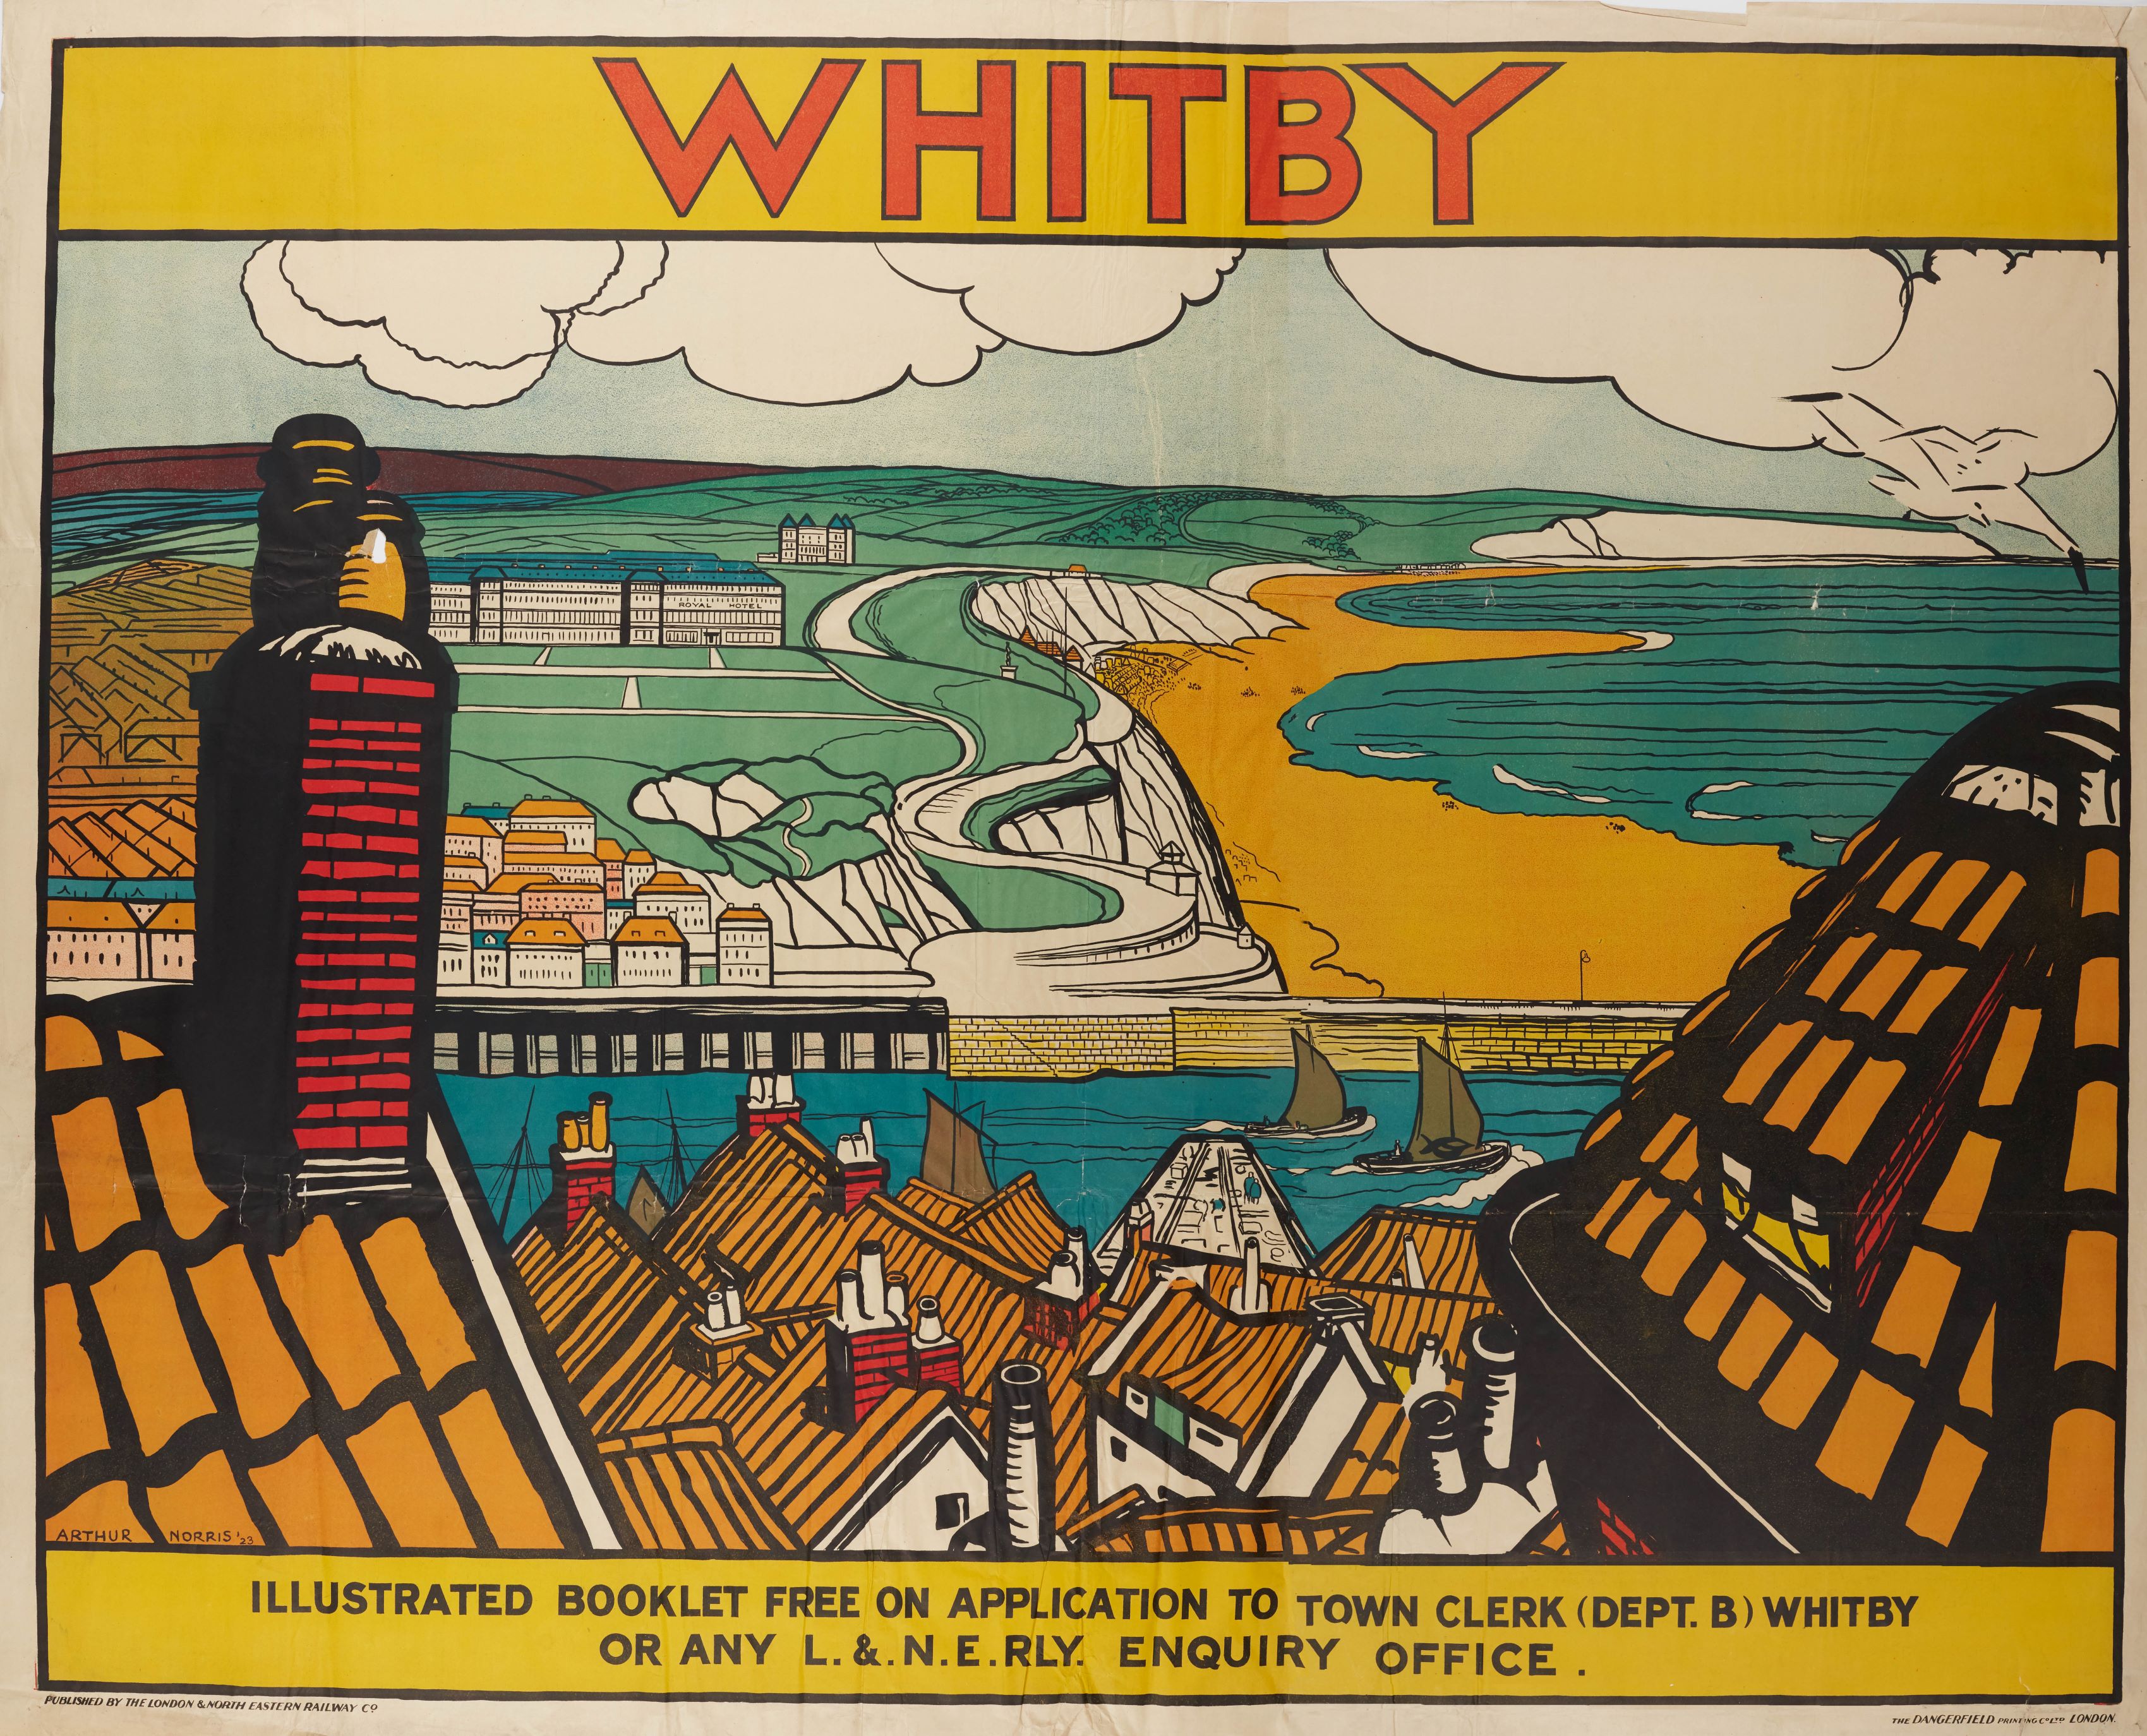 A London and North-Eastern Railways advertisement poster for Whitby (no date). From the Whitby Museum Manuscripts collection.